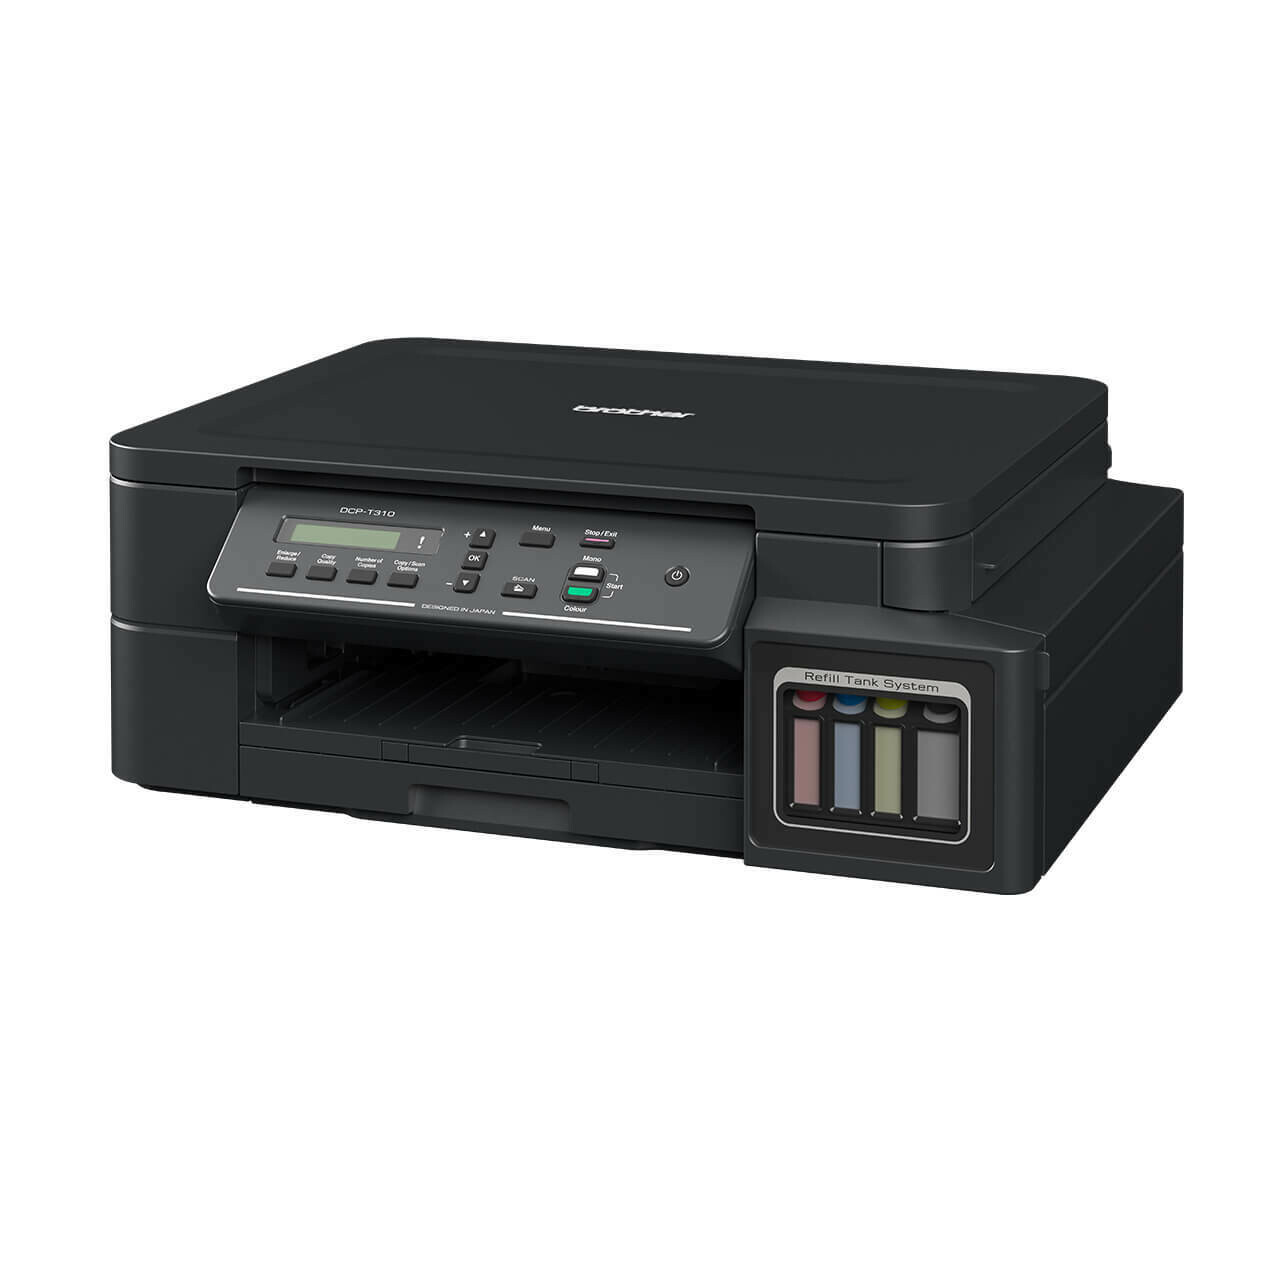 Brother DCP-T310 Ink Tank Printer